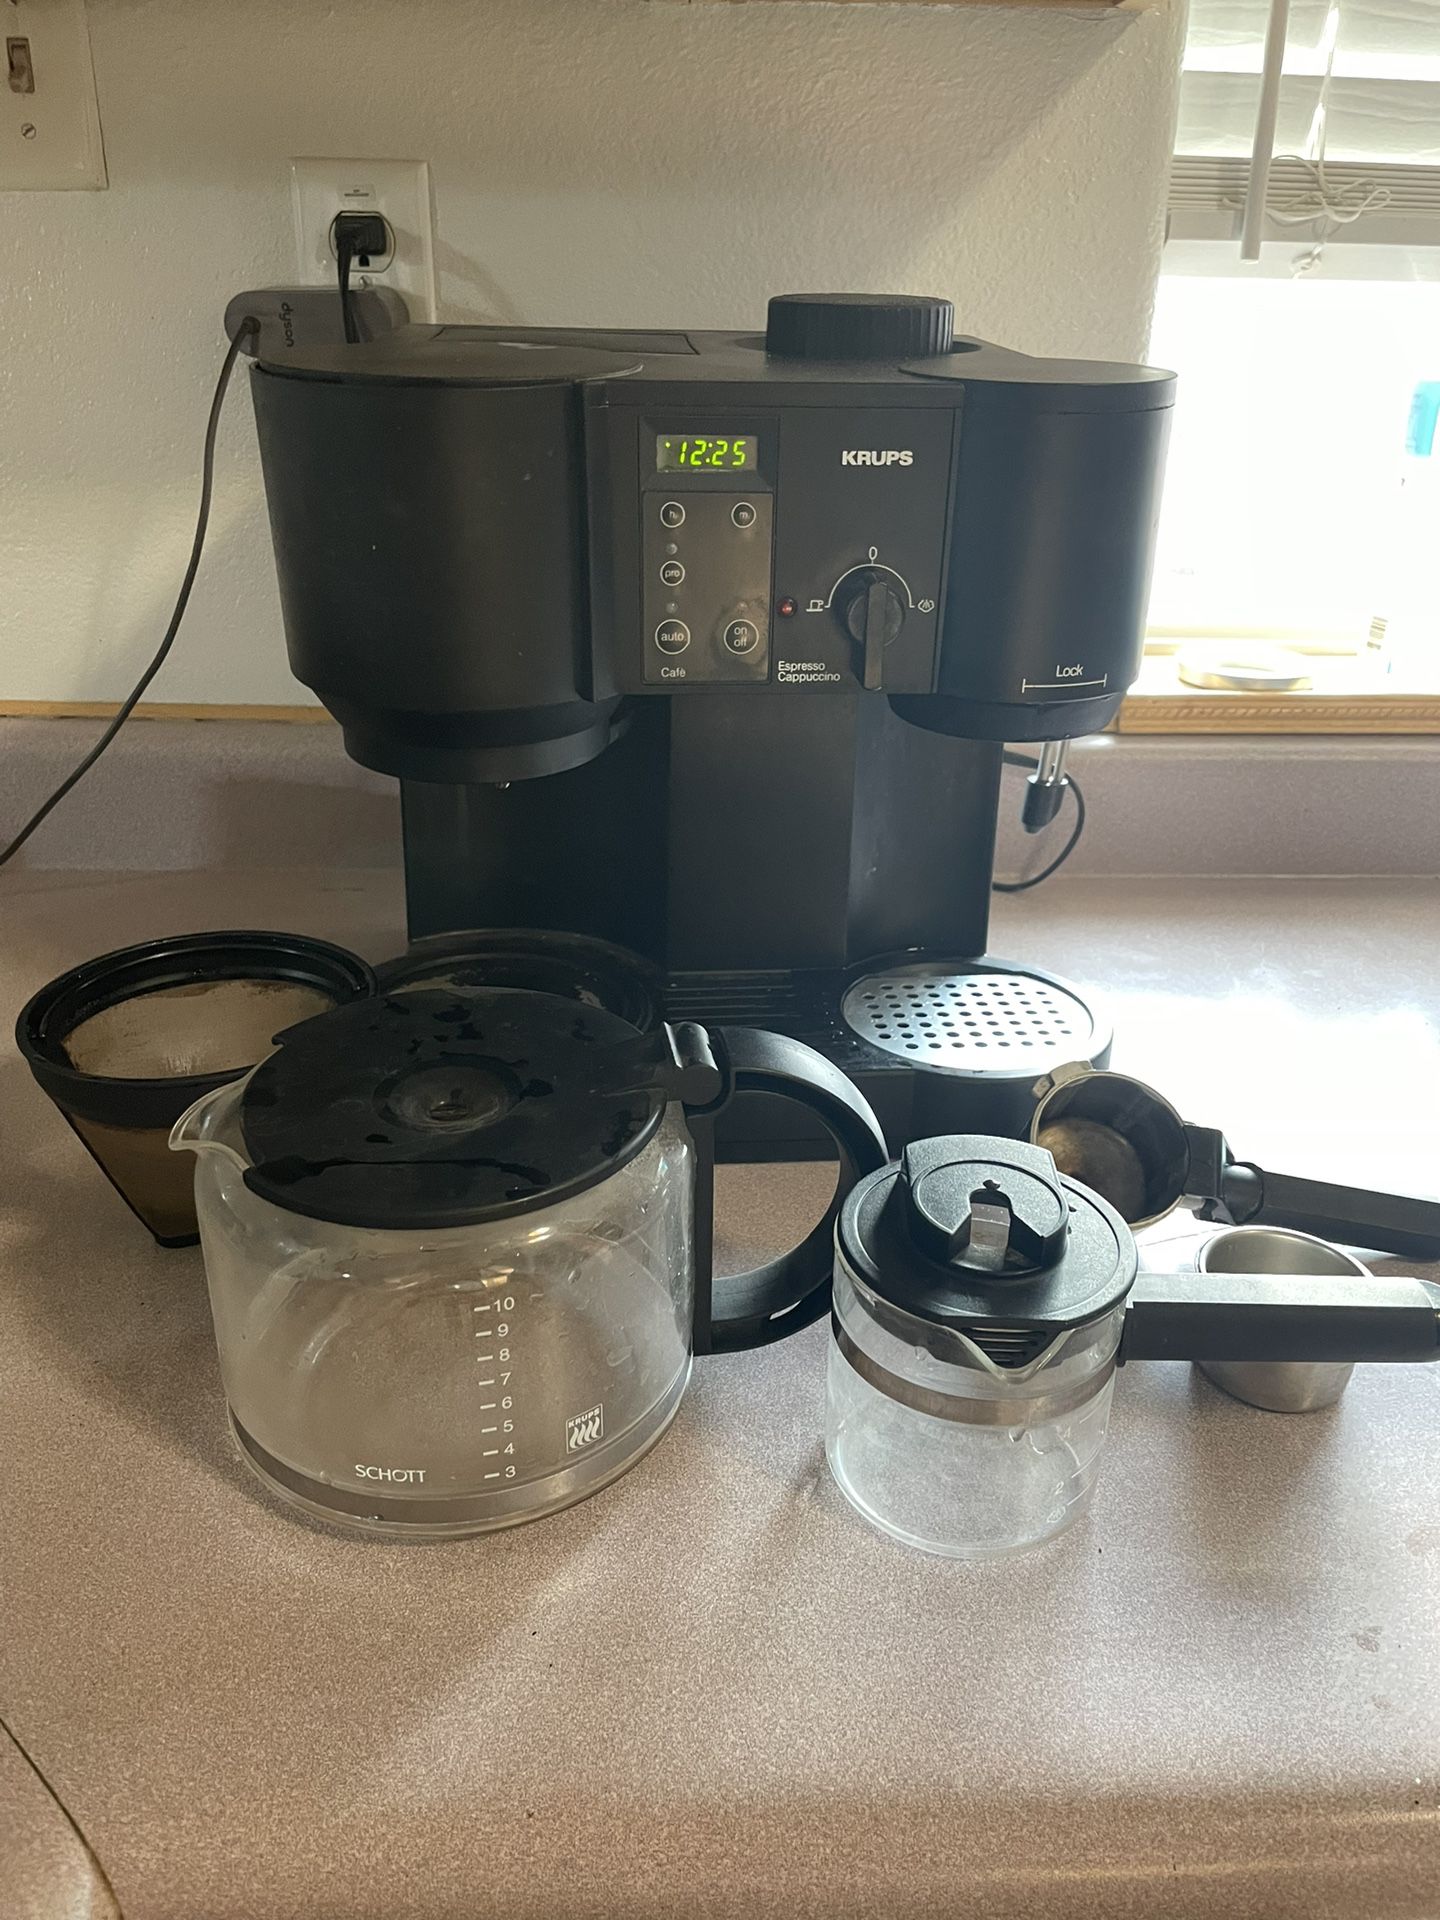 Crux Coffee maker for Sale in Peoria, AZ - OfferUp